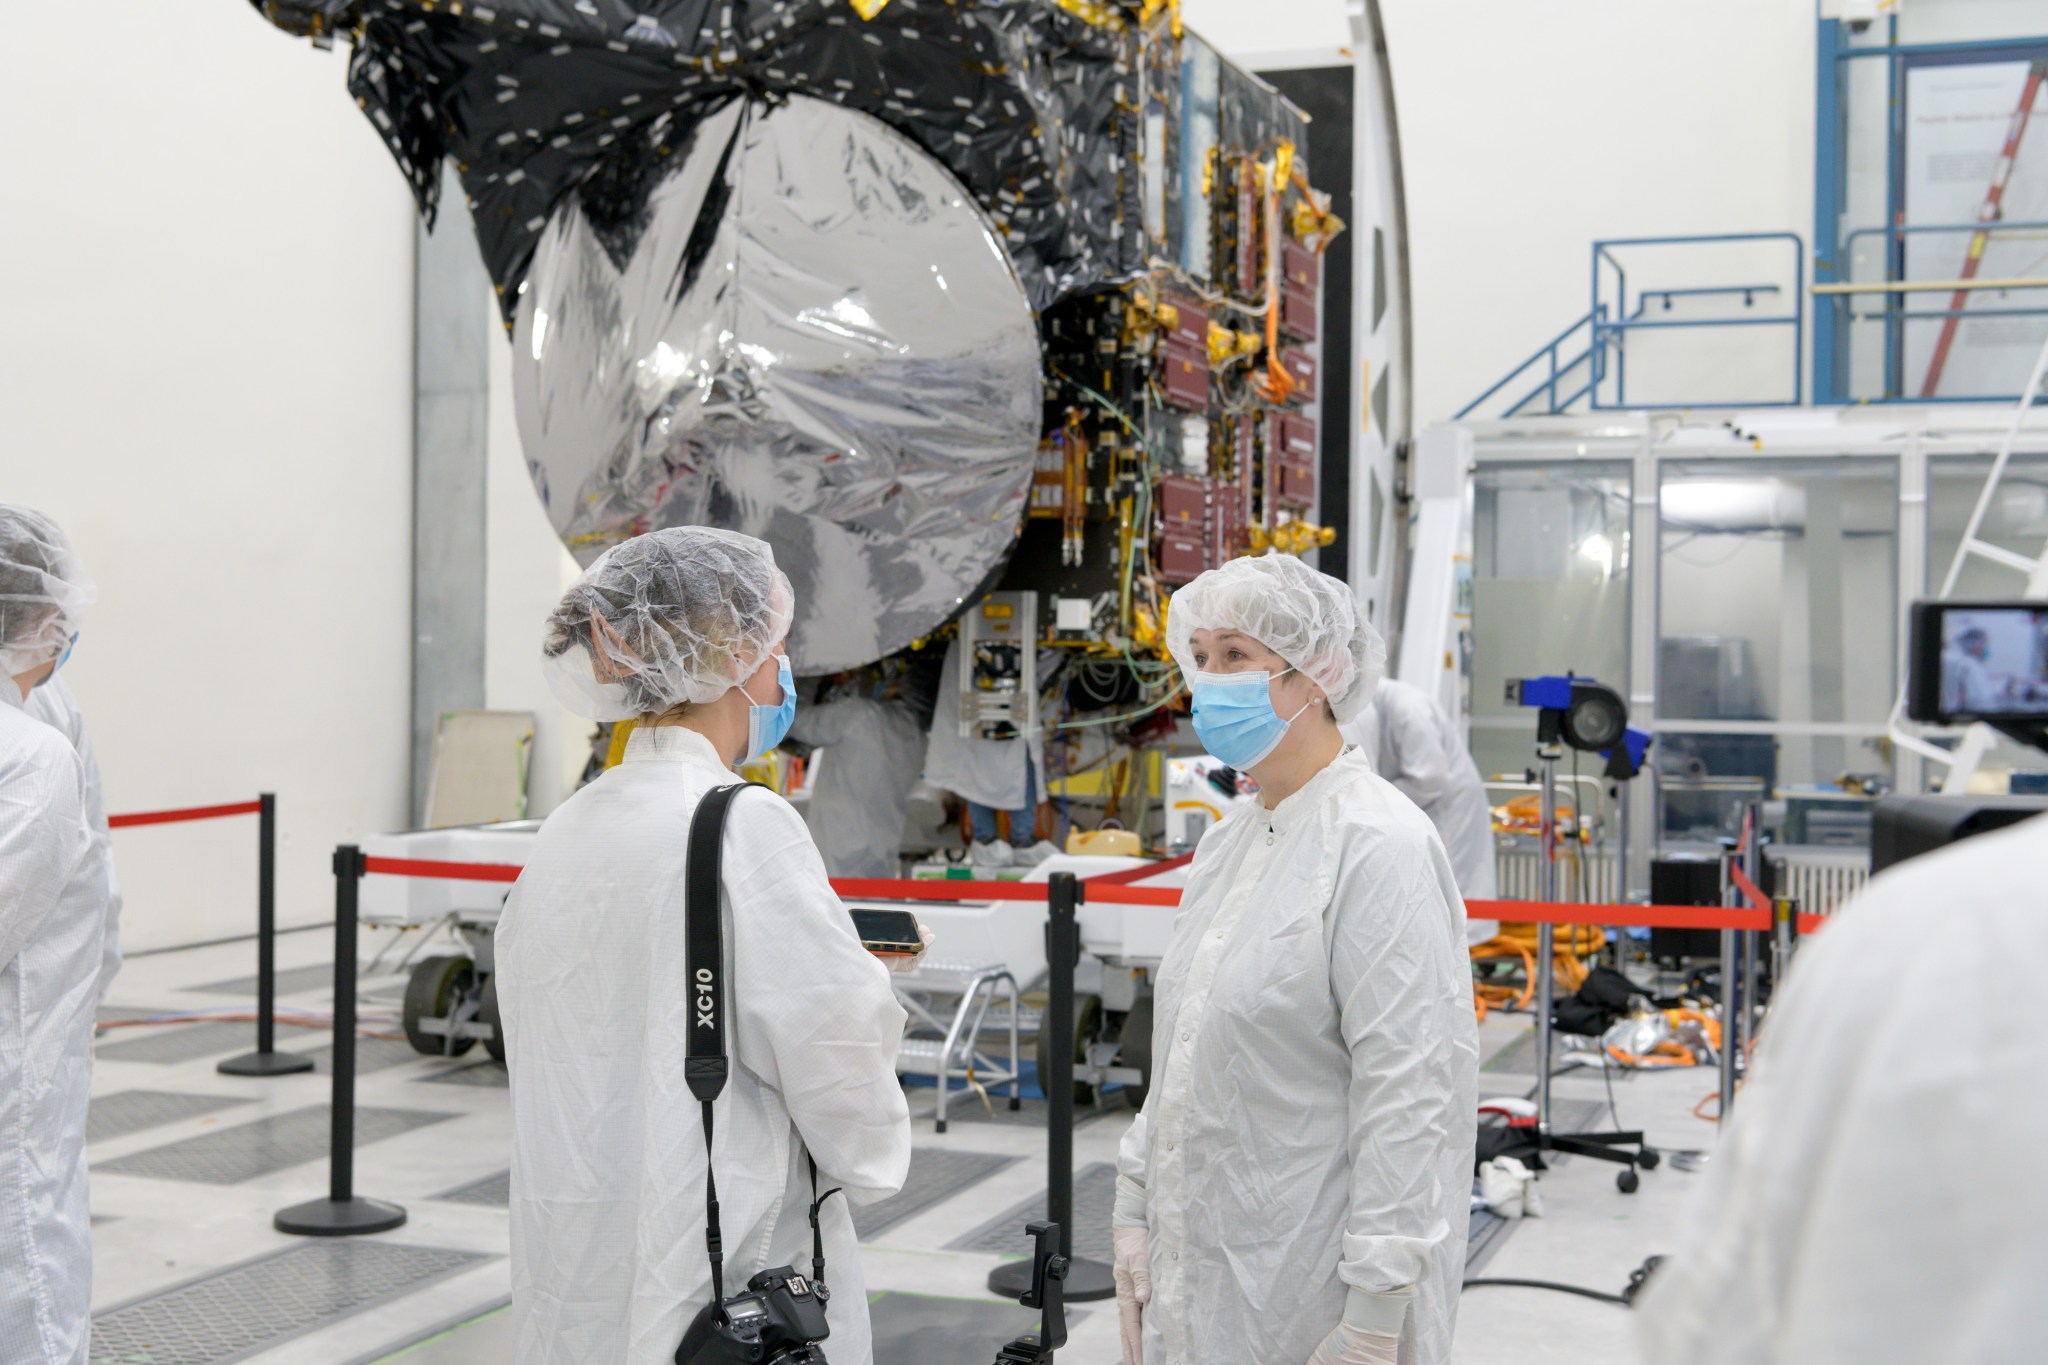 A member of the media interviews Lindy Elkins-Tanton, the principal investigator of NASA’s Psyche mission, in front of the spacecraft on April 11, 2022, inside a clean room at JPL.